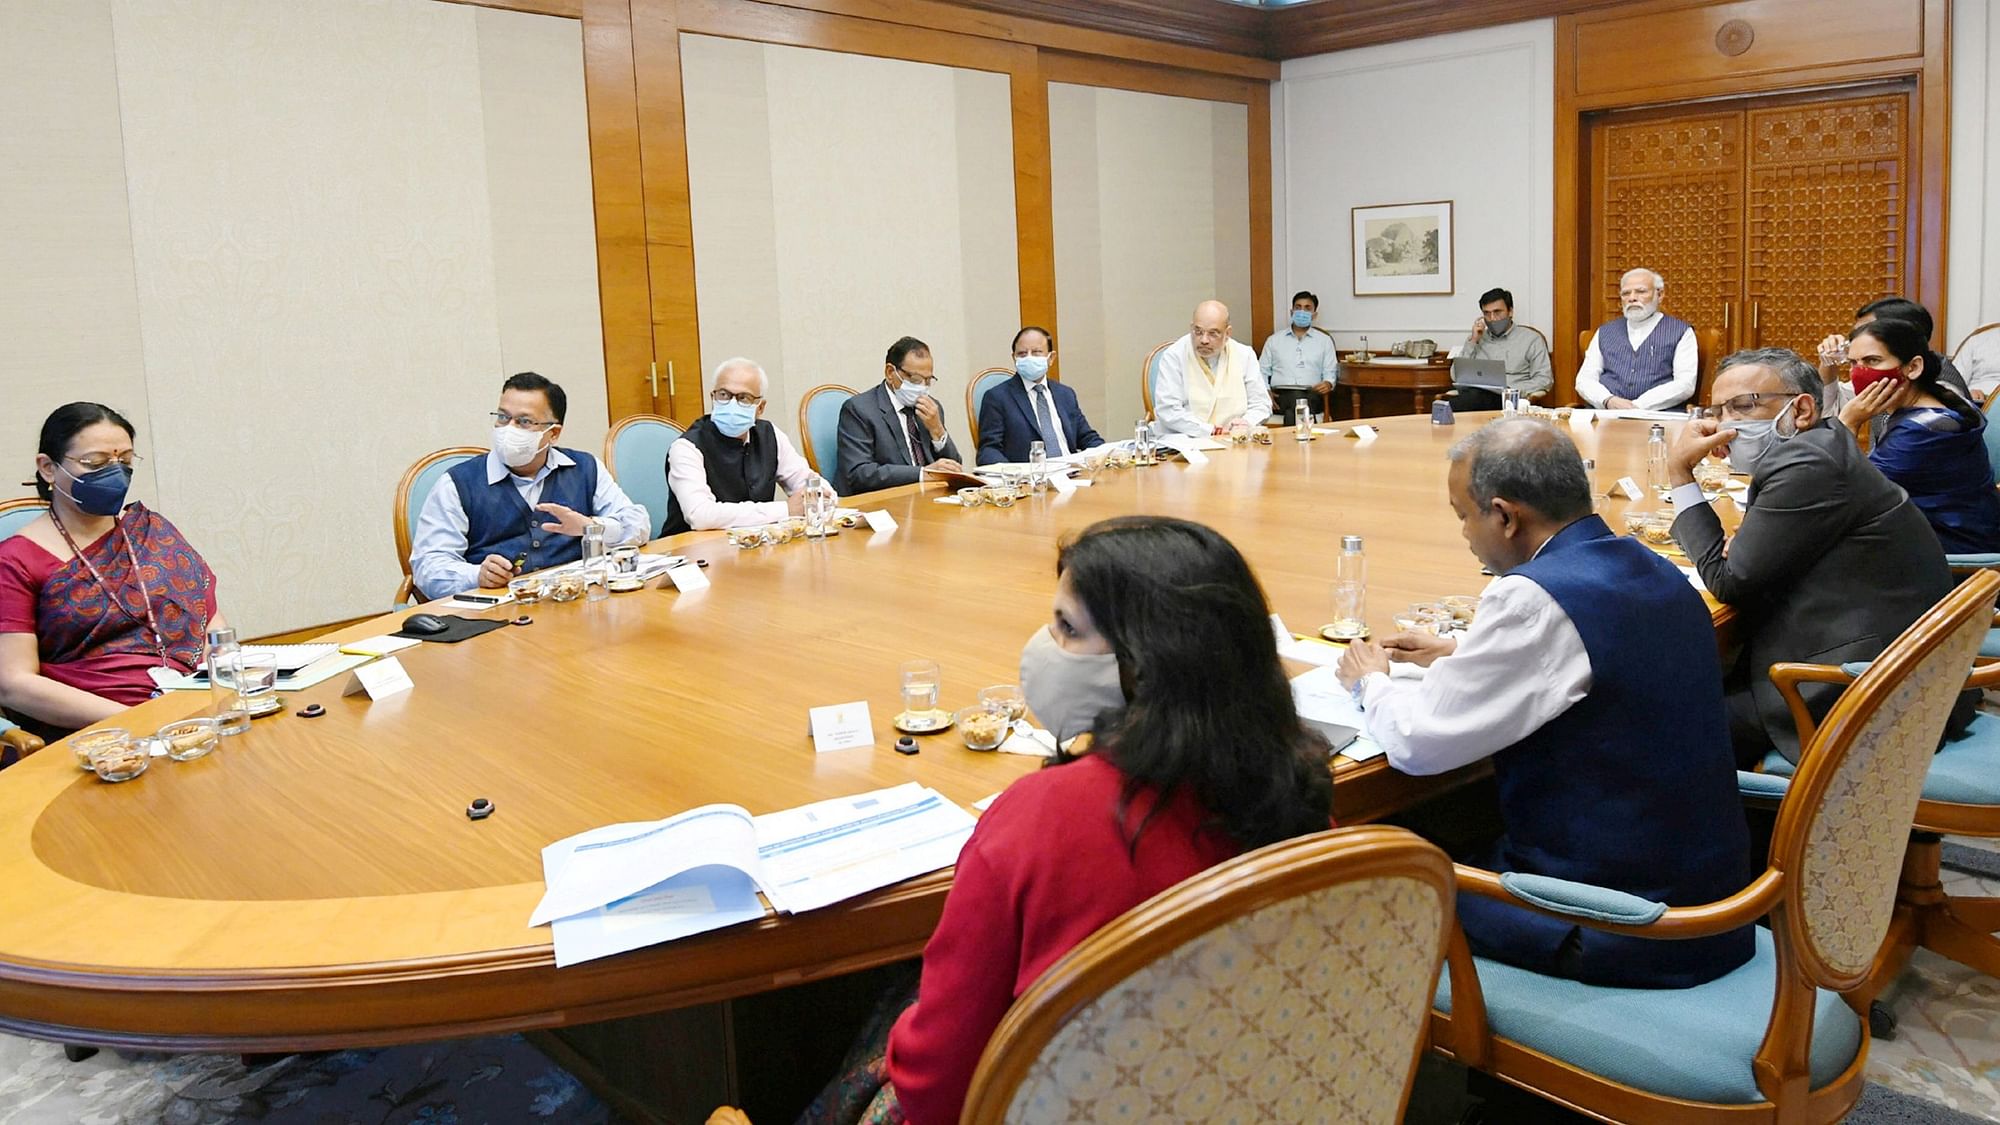 <div class="paragraphs"><p>Prime Minister Narendra Modi on Wednesday, 9 March, chaired a high-level meeting to review the <a href="https://www.thequint.com/topic/coronavirus">COVID-19 situation</a> and the status of the vaccination drive in the country.</p></div>